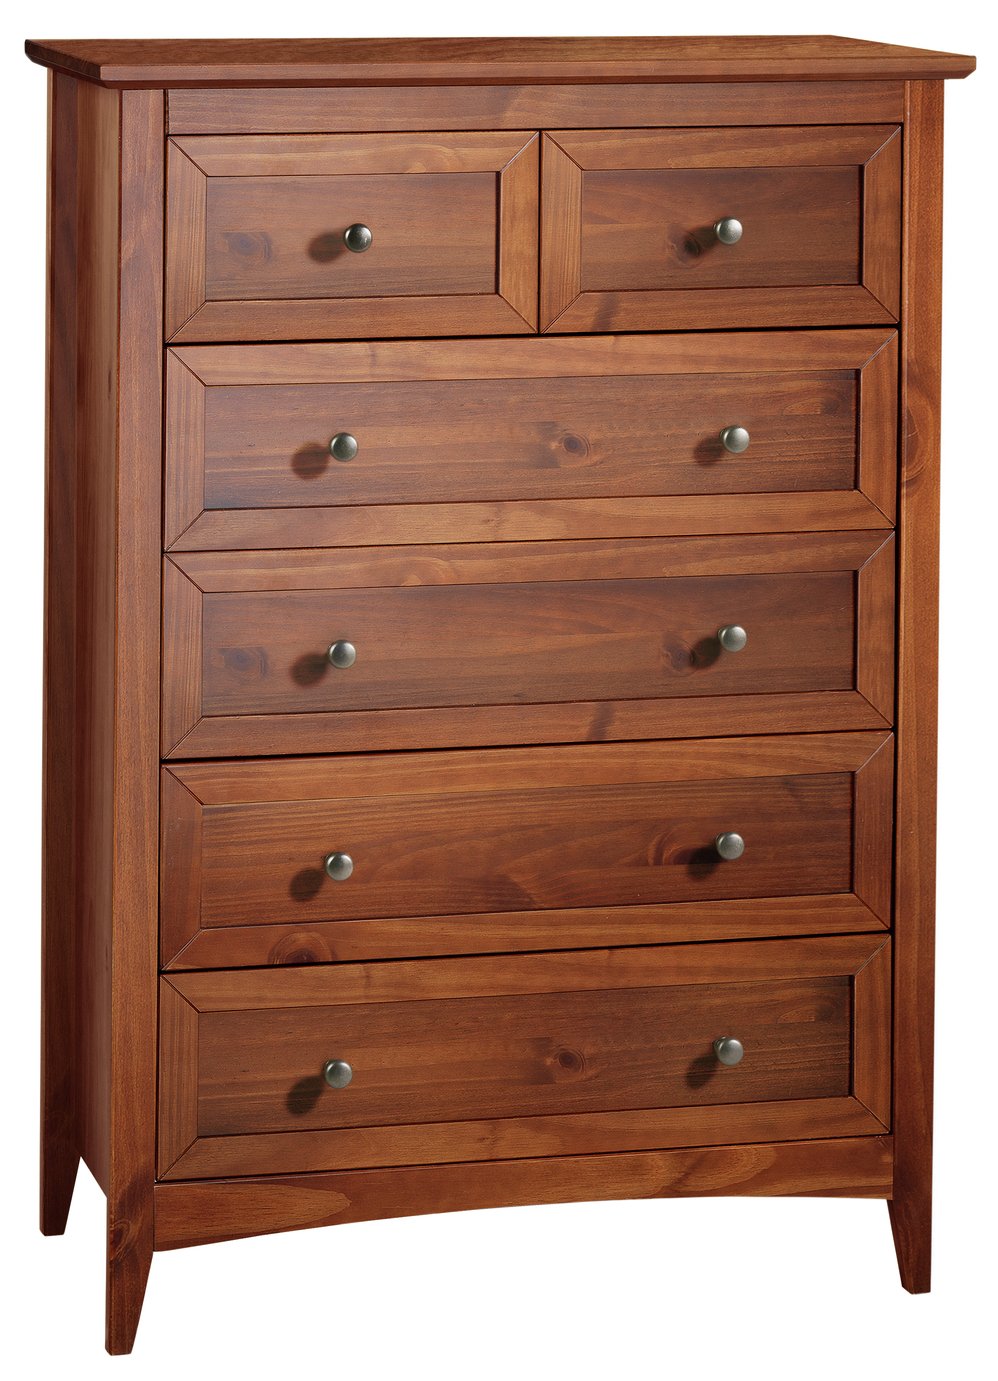 Collection Camborne 4+2 Drawer Chest - Walnut Stain. Review